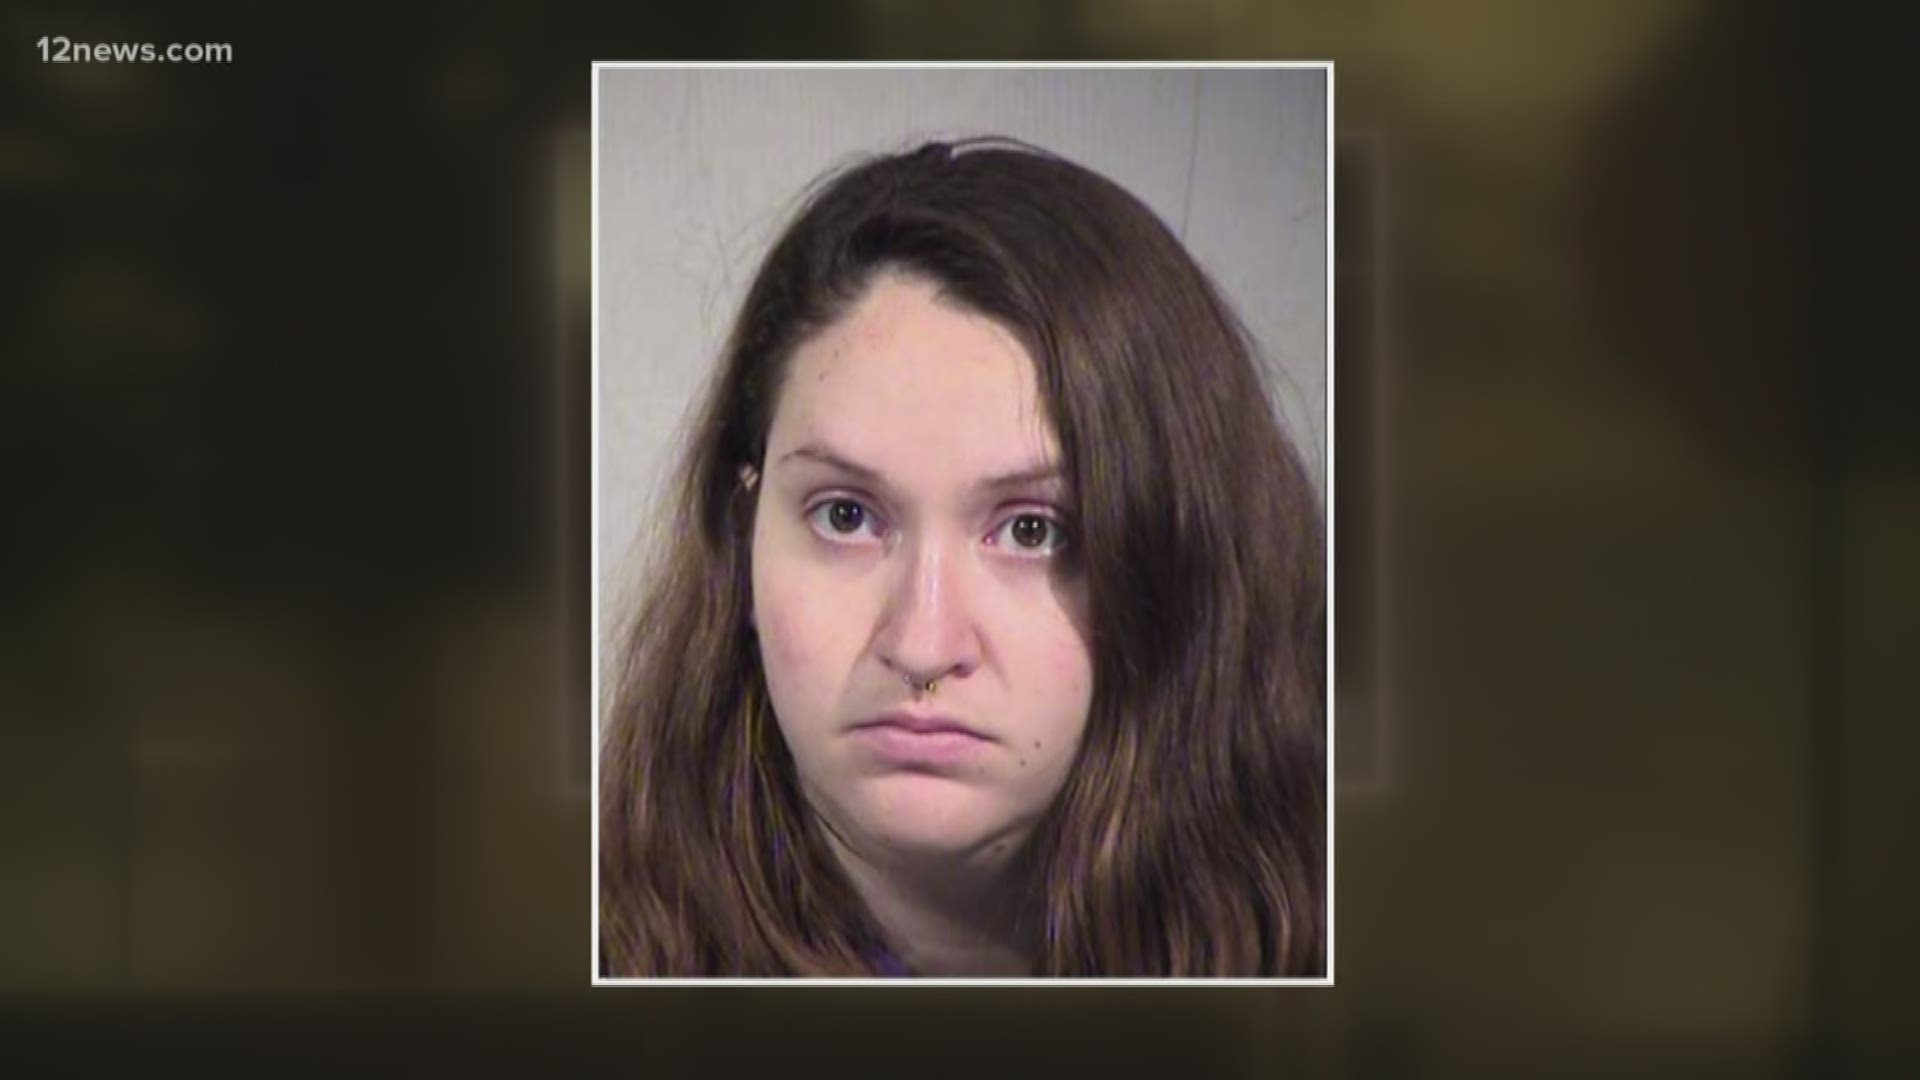 Nearly a week after a newborn was found dead at an Amazon facility near 51st Ave. and Buckeye, 22-year-old Samantha Vivier, has been arrested. The newborn was found in a women's restroom at the facility.